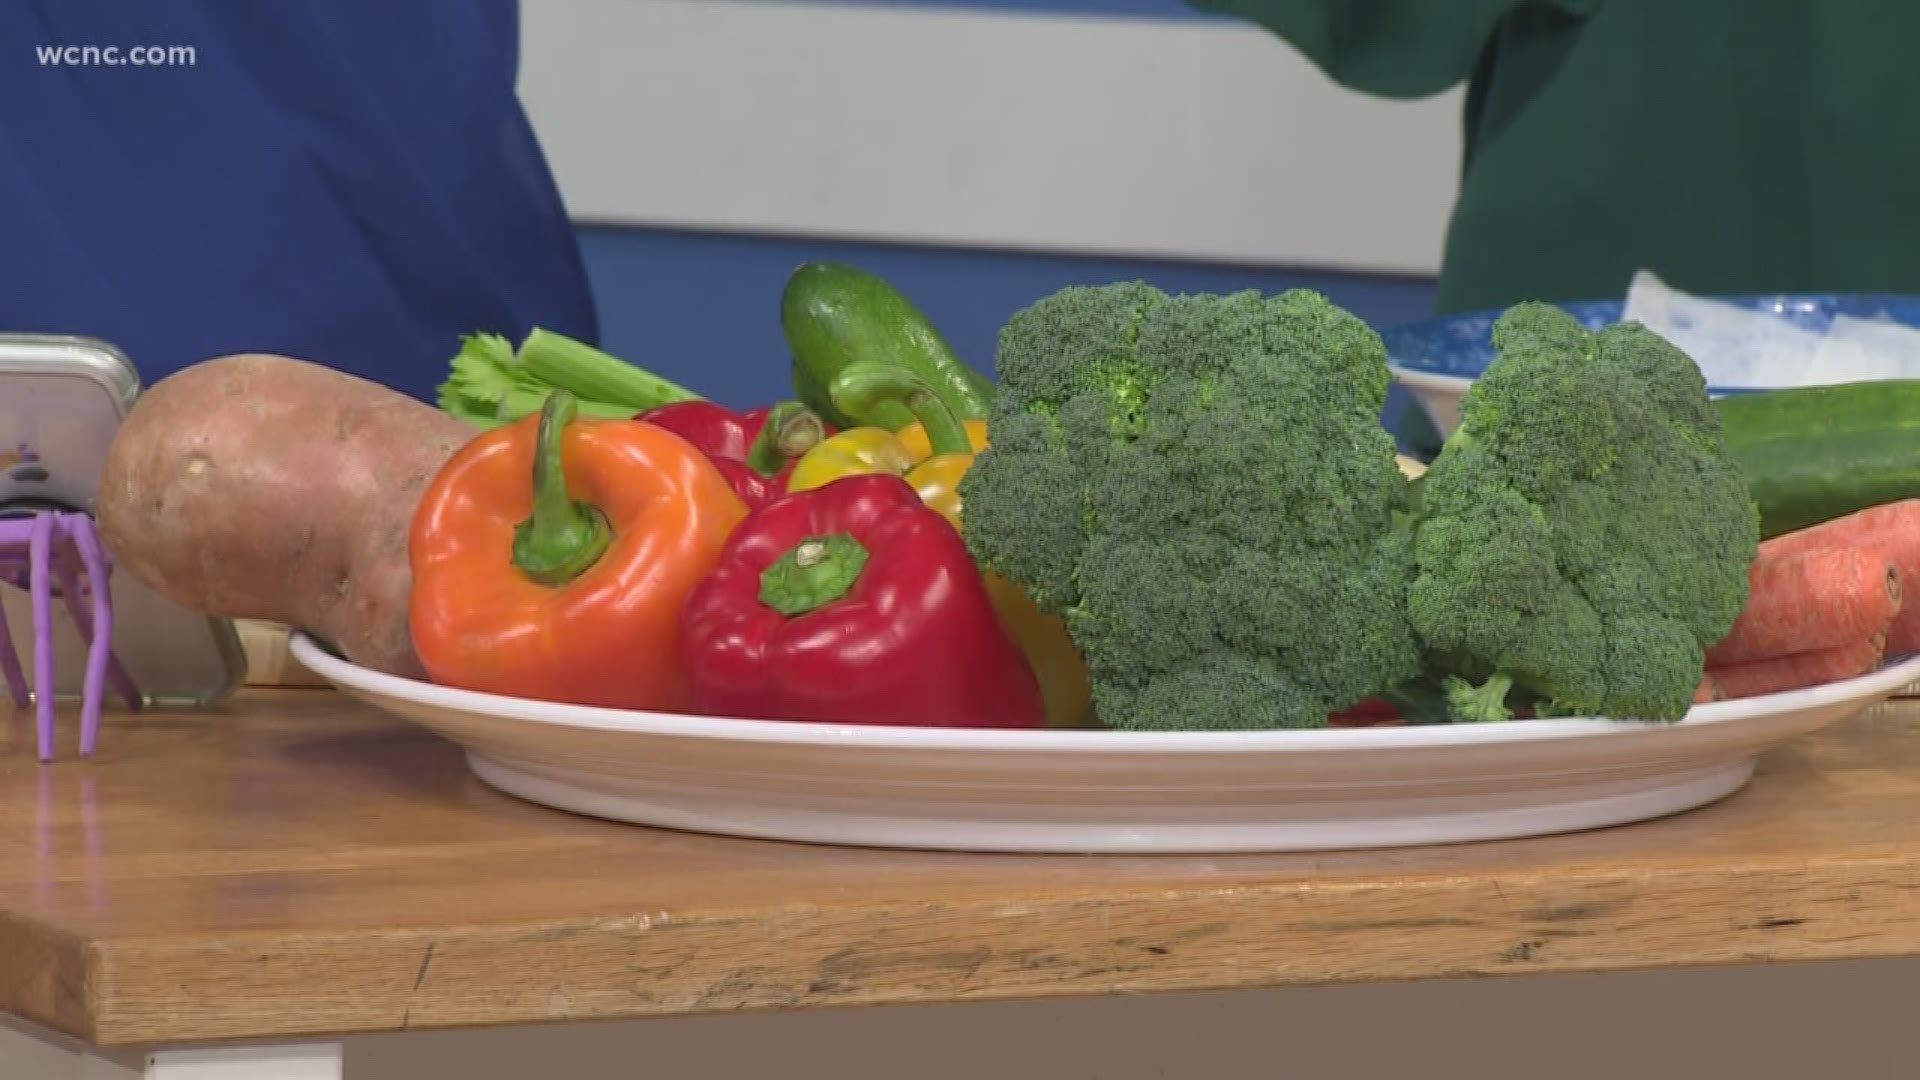 Health Coach Tammy Panovich shows how easy and quick it can be to have healthy meals prepared for the whole week.